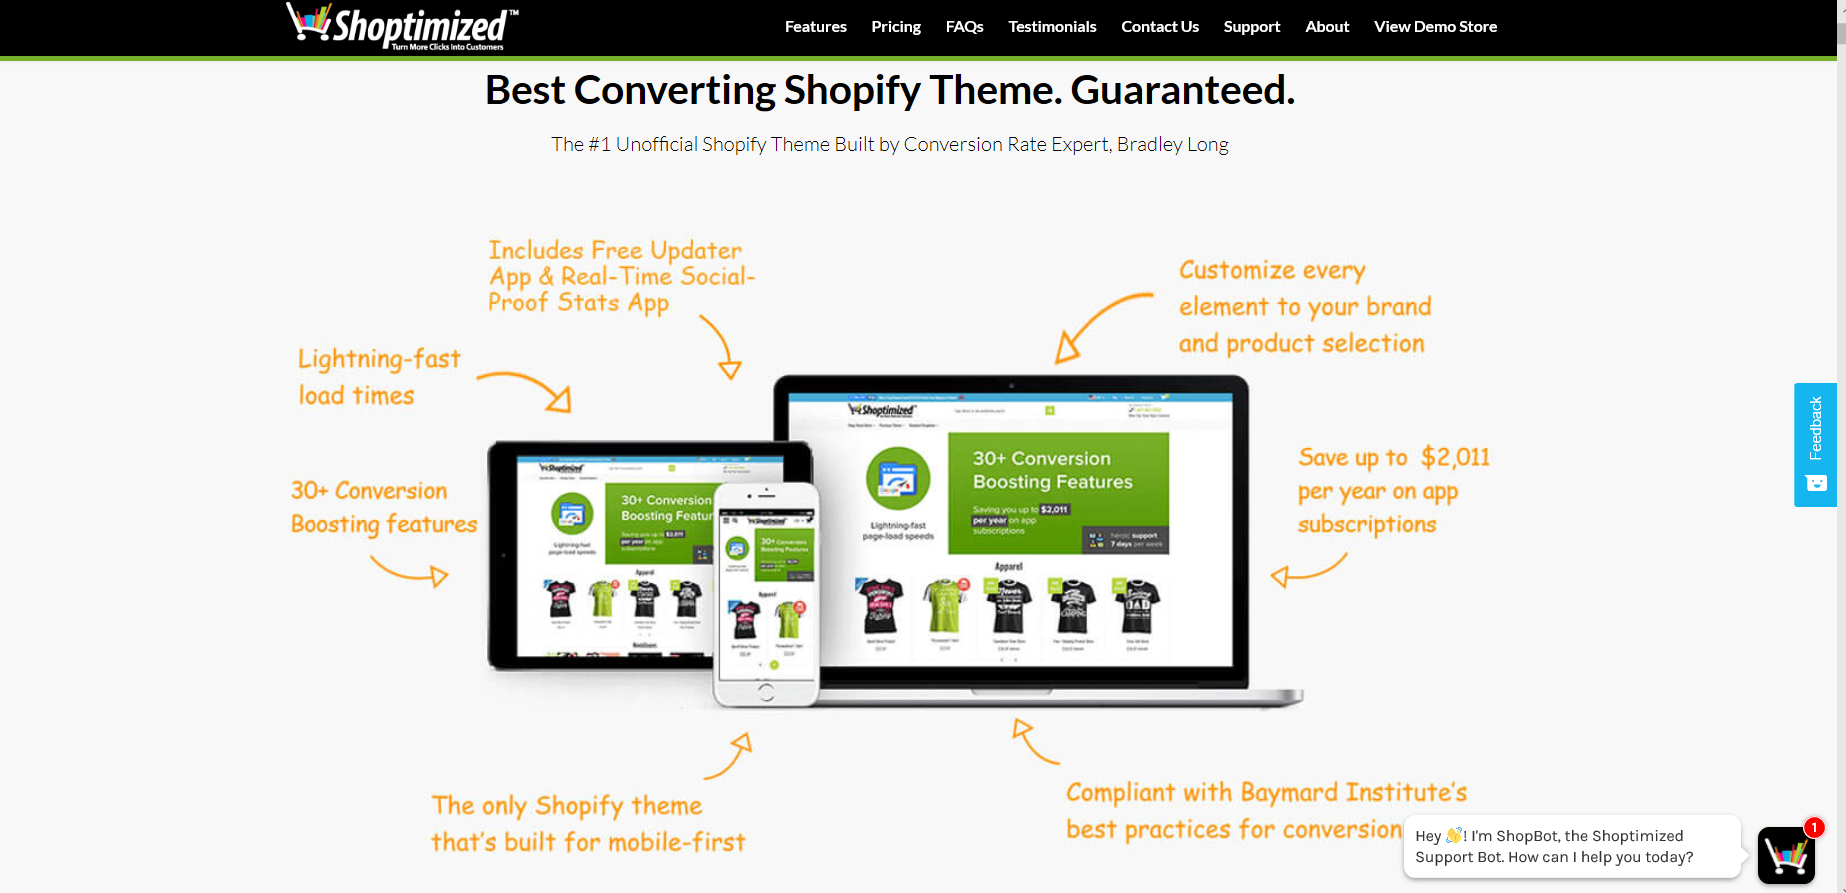 Shoptimized theme is highest converting on shopify